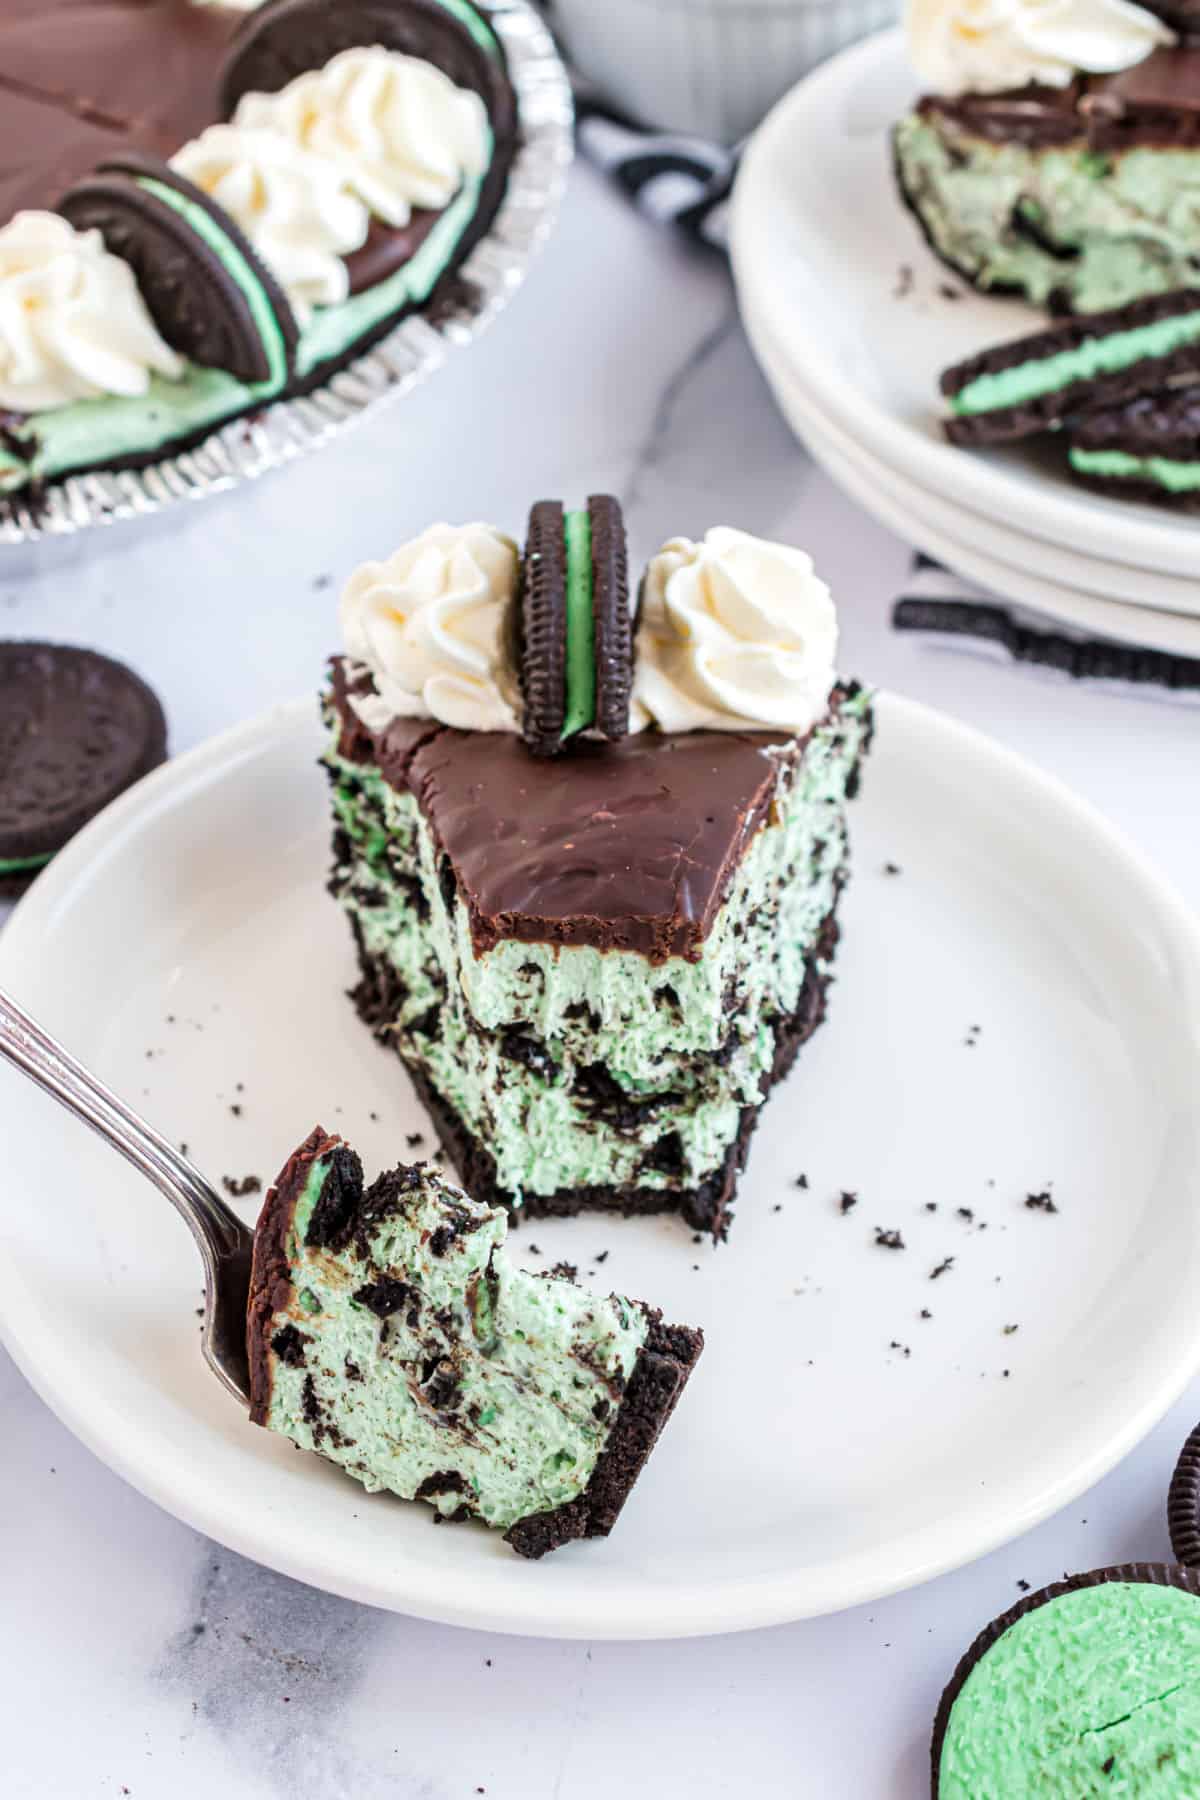 Slice of mint oreo cheesecake with a bite taken out.